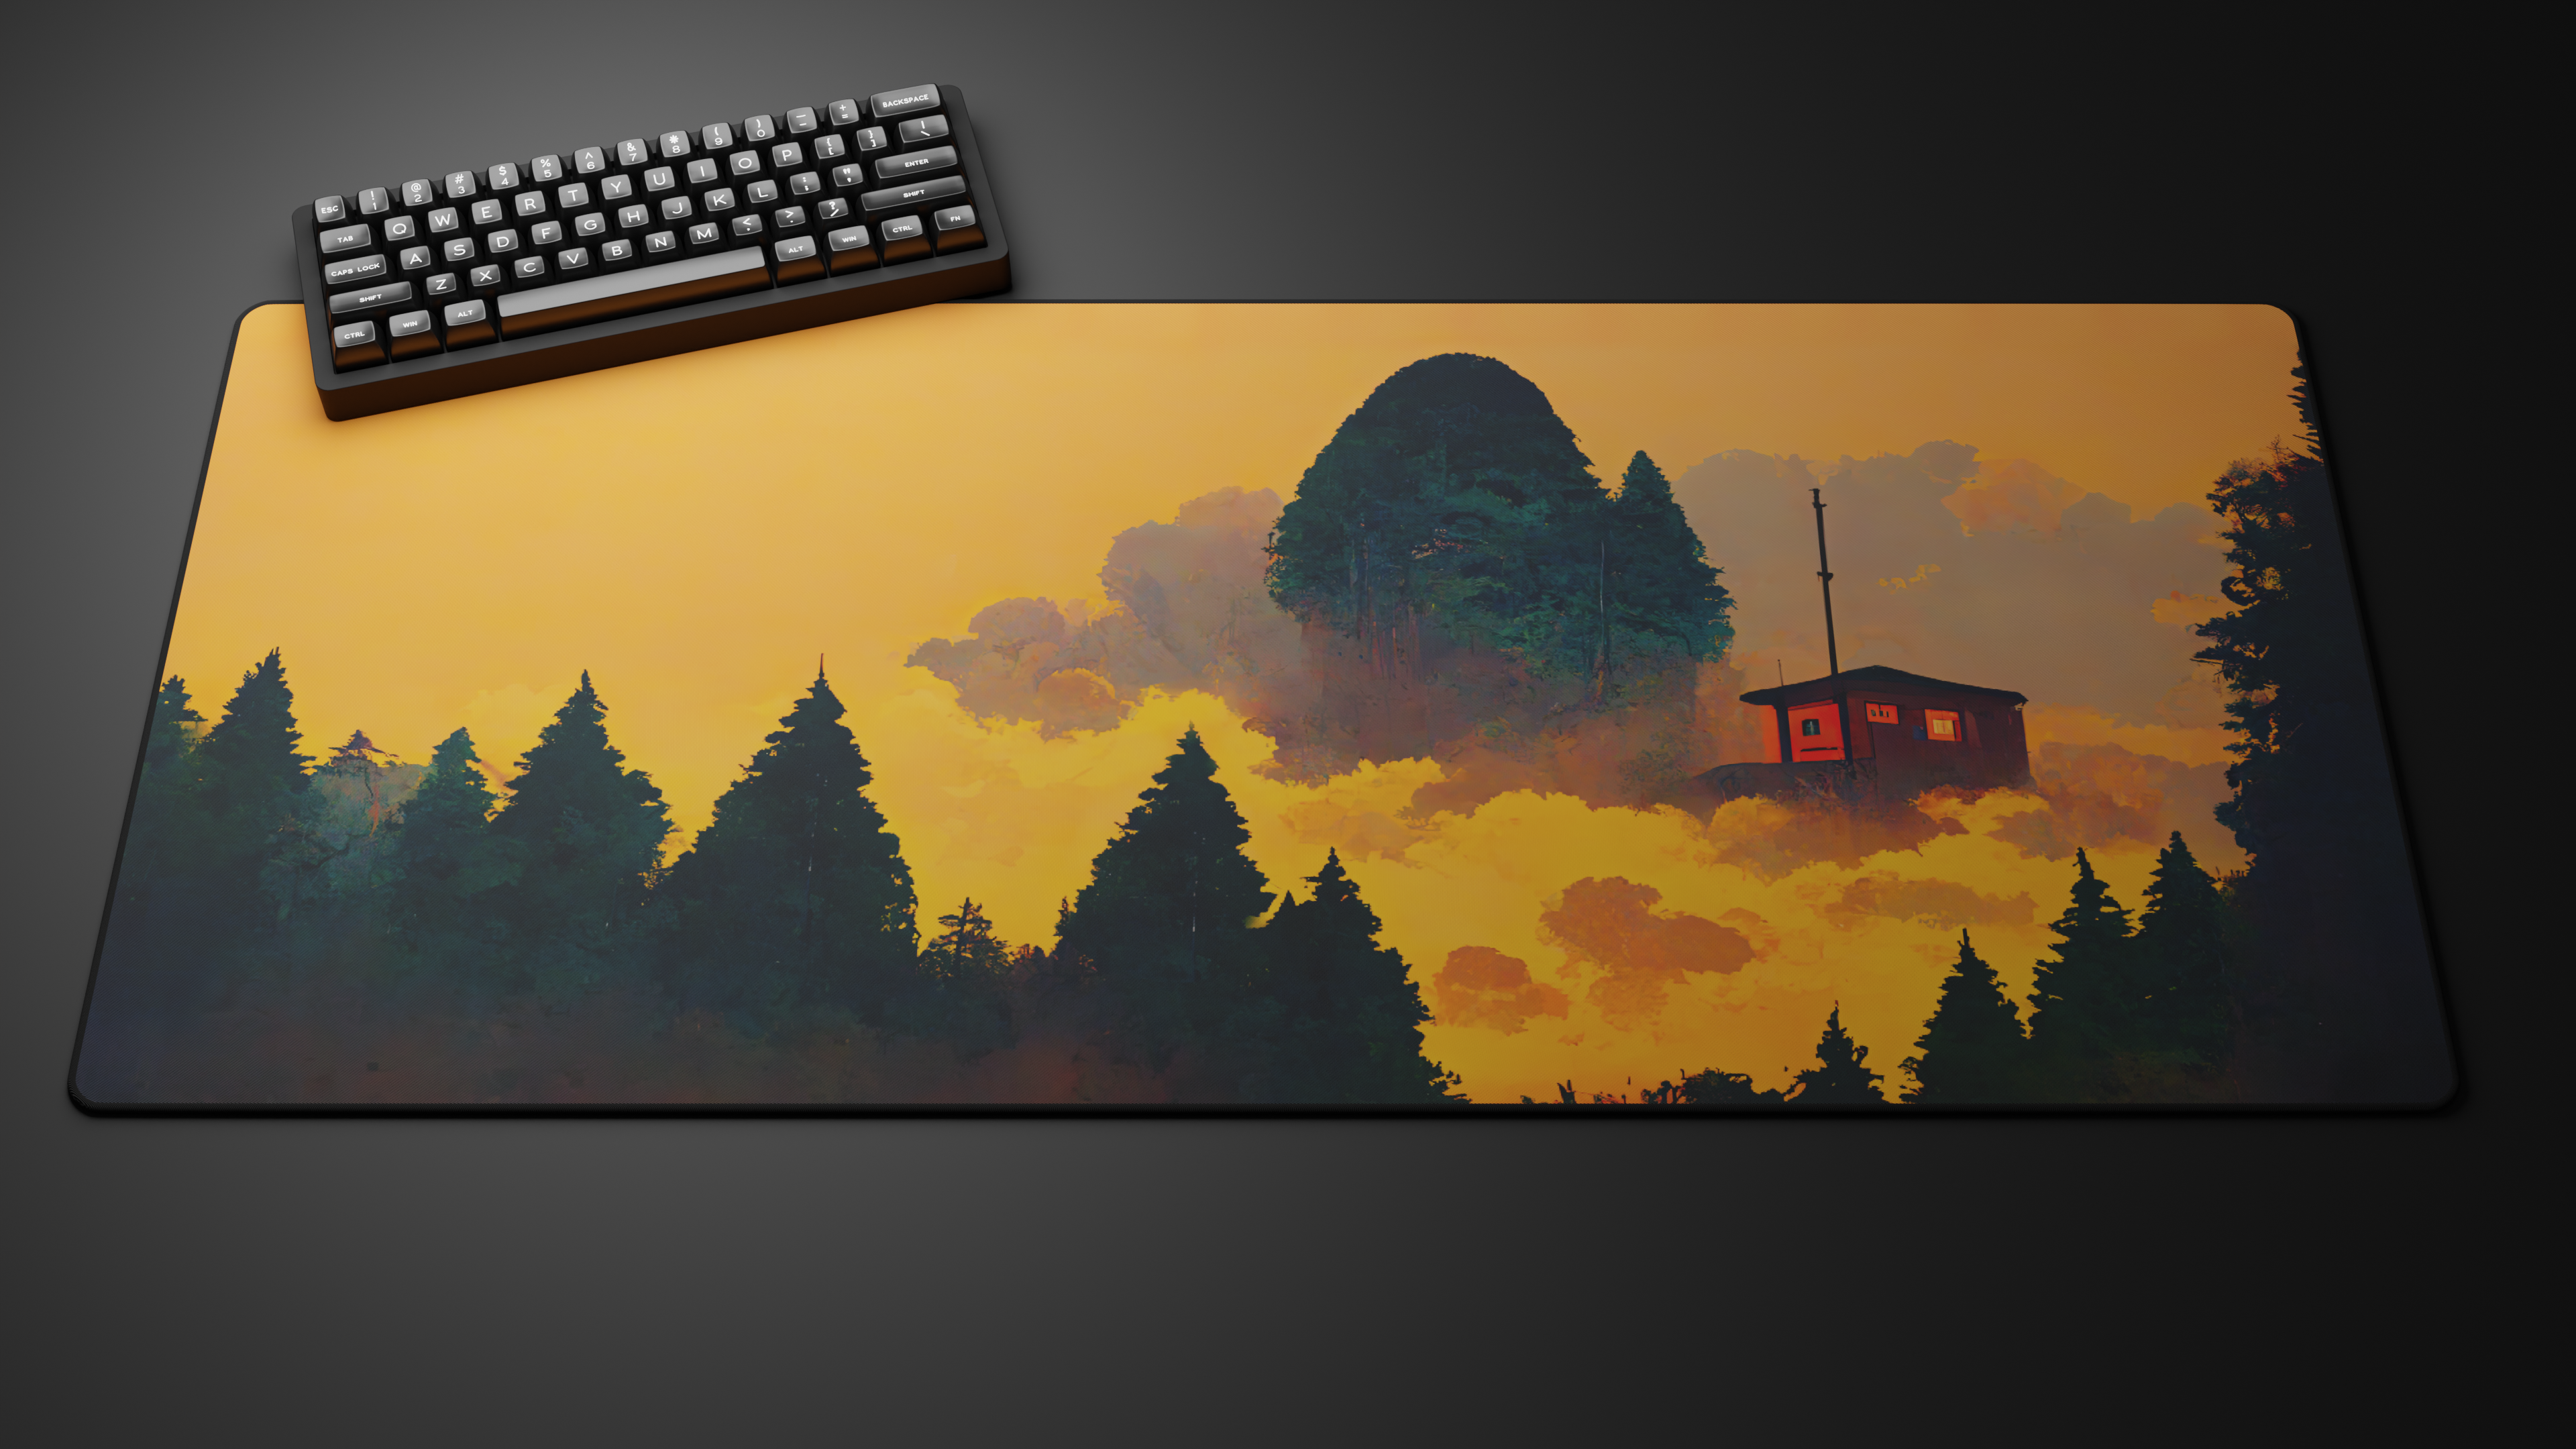 Deskmat 'AI Collection - Cabin in the forest' by glutch